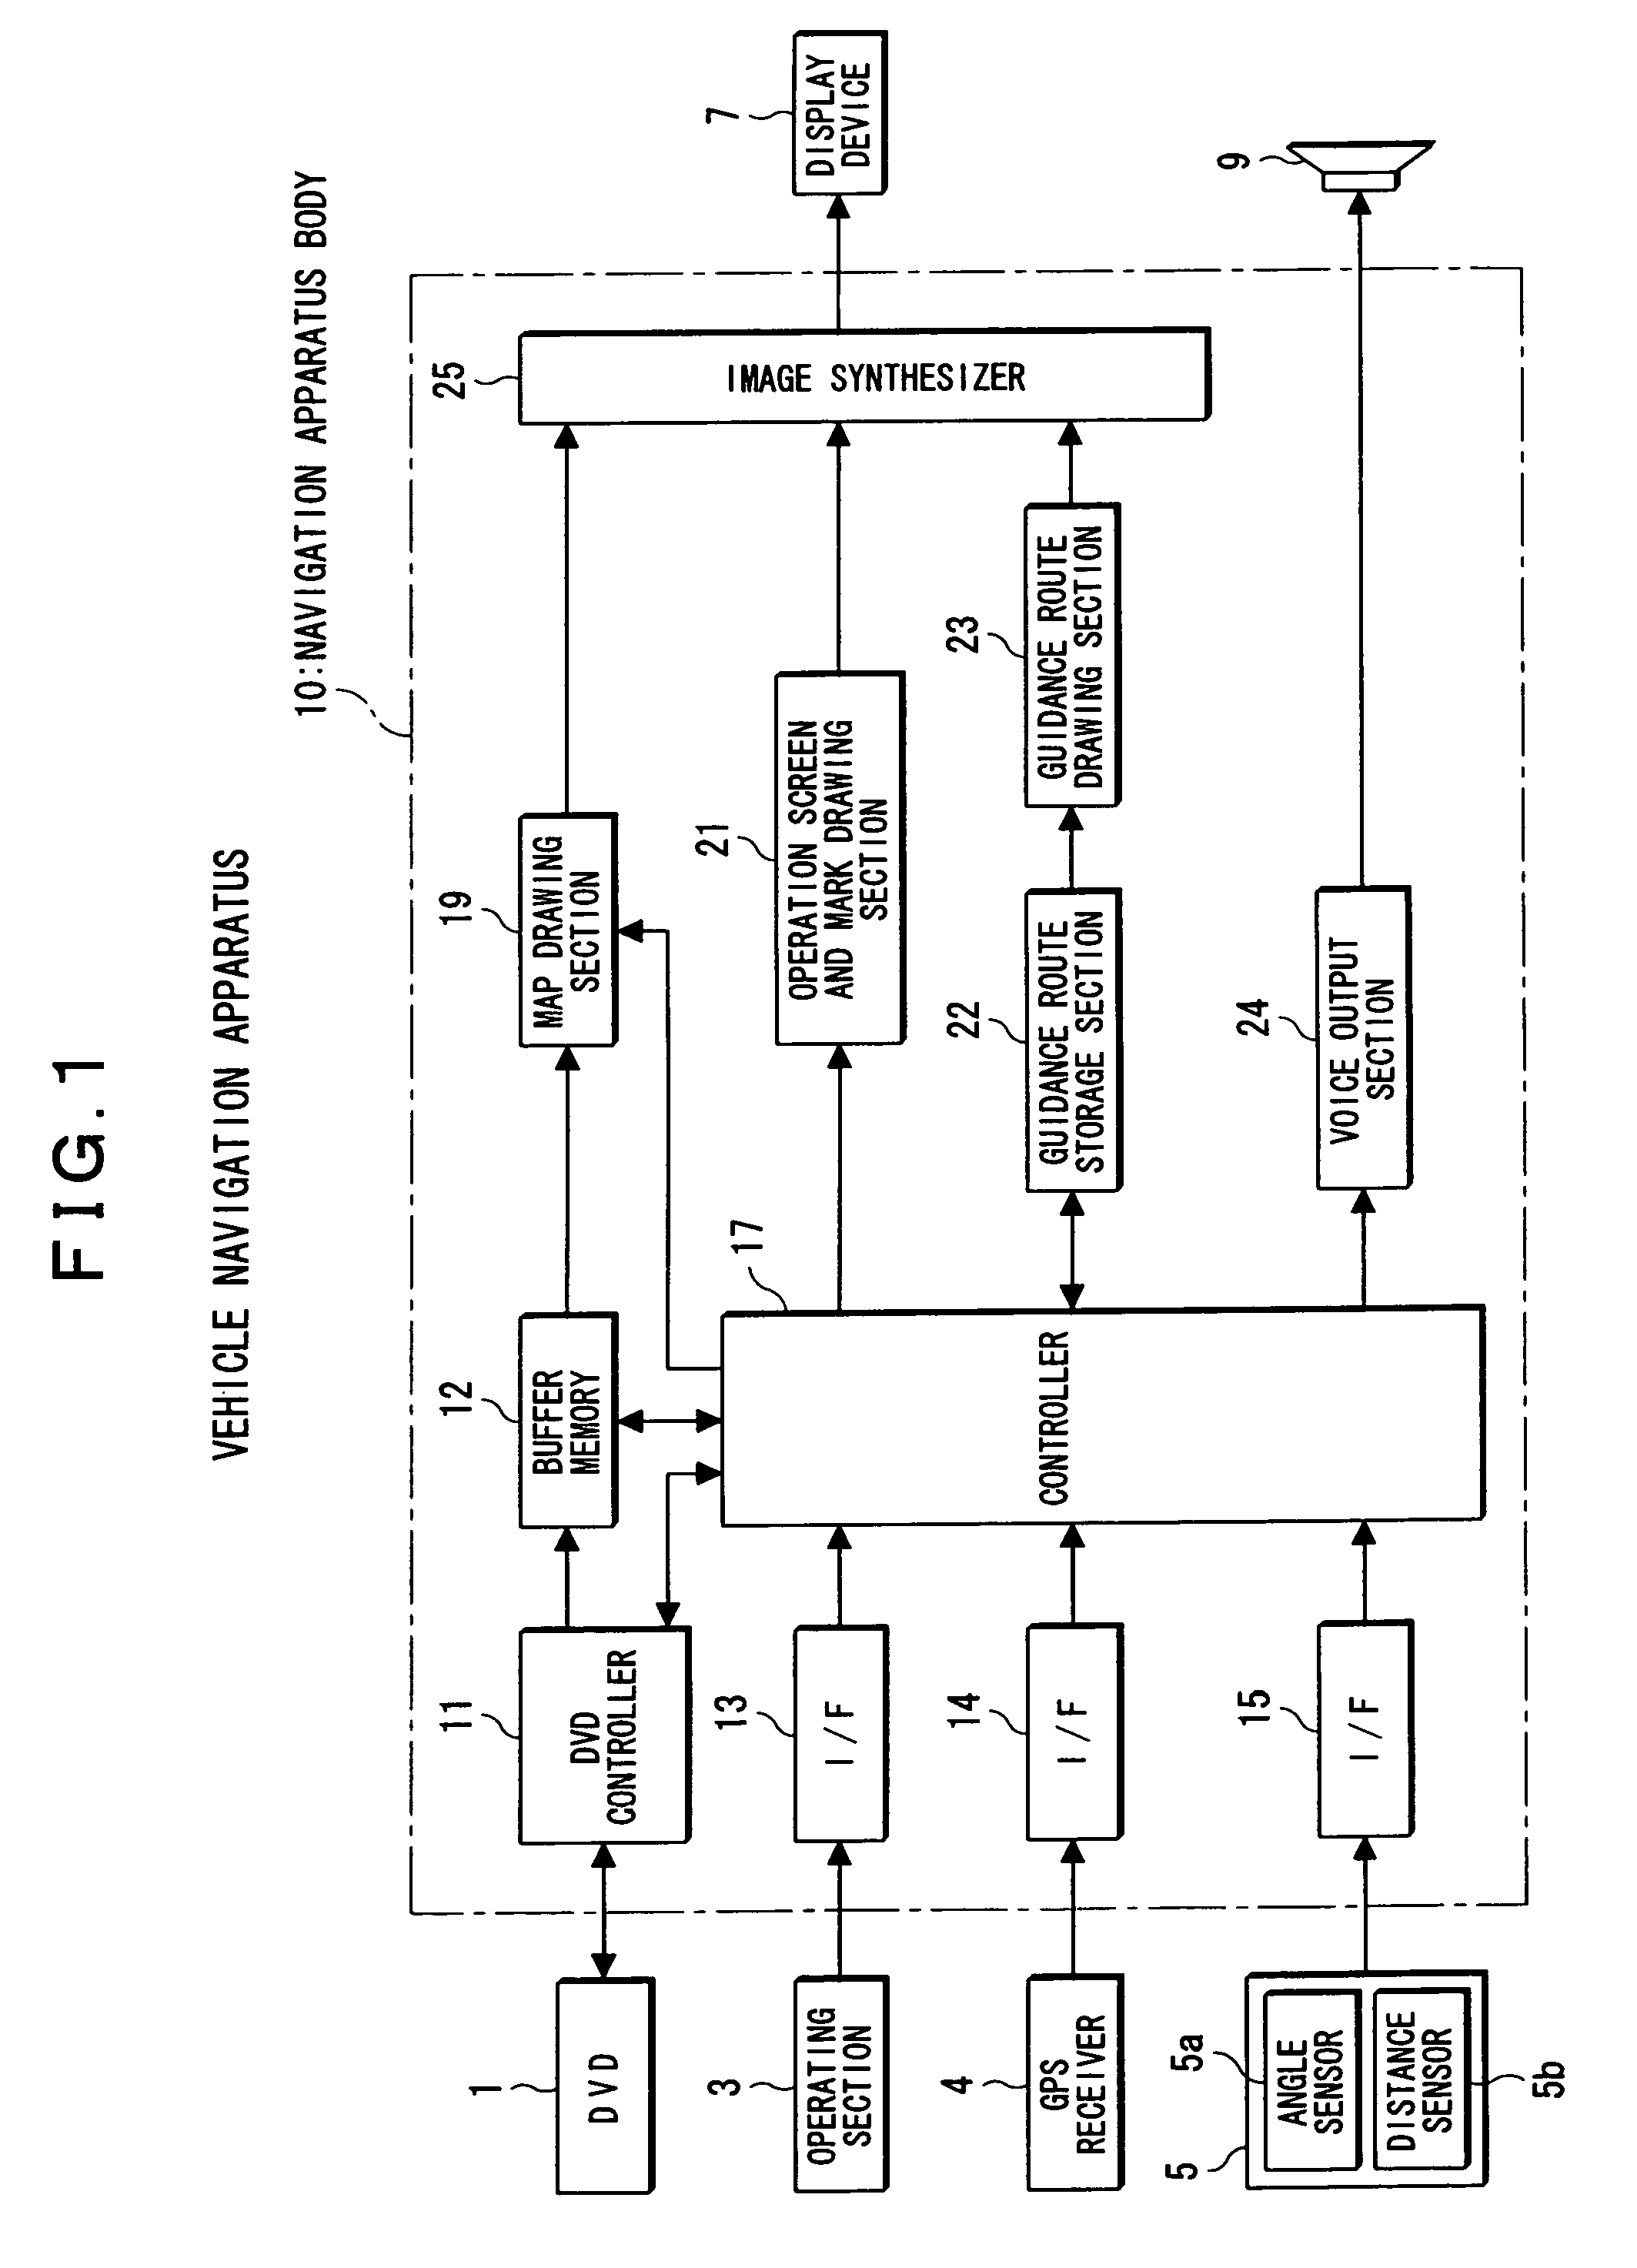 Vehicle navigation apparatus and method with traveling direction indication at guidance intersection